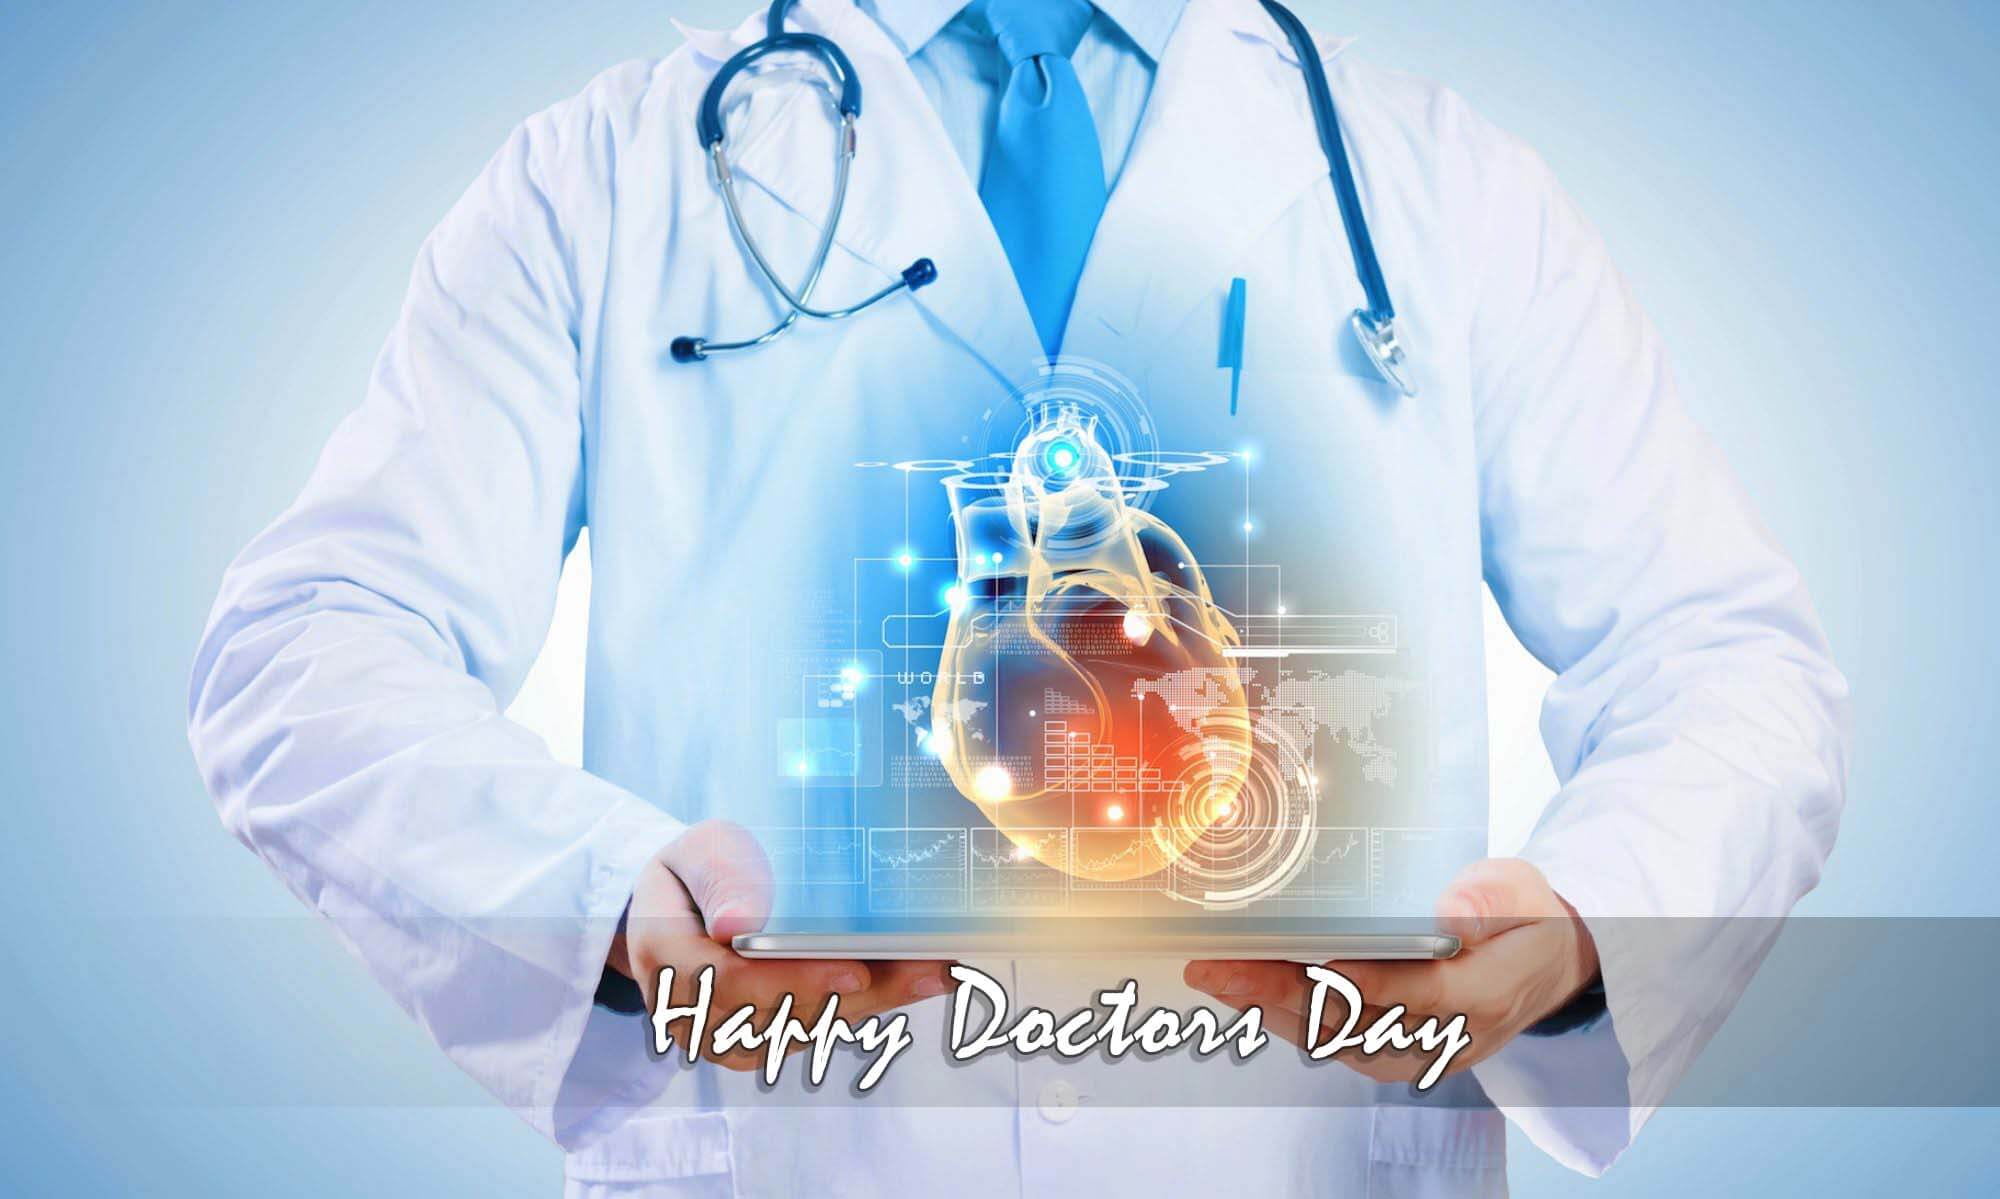 Happy Doctors Day Wishes Greetings Ai Cardiac Hd Wallpaper